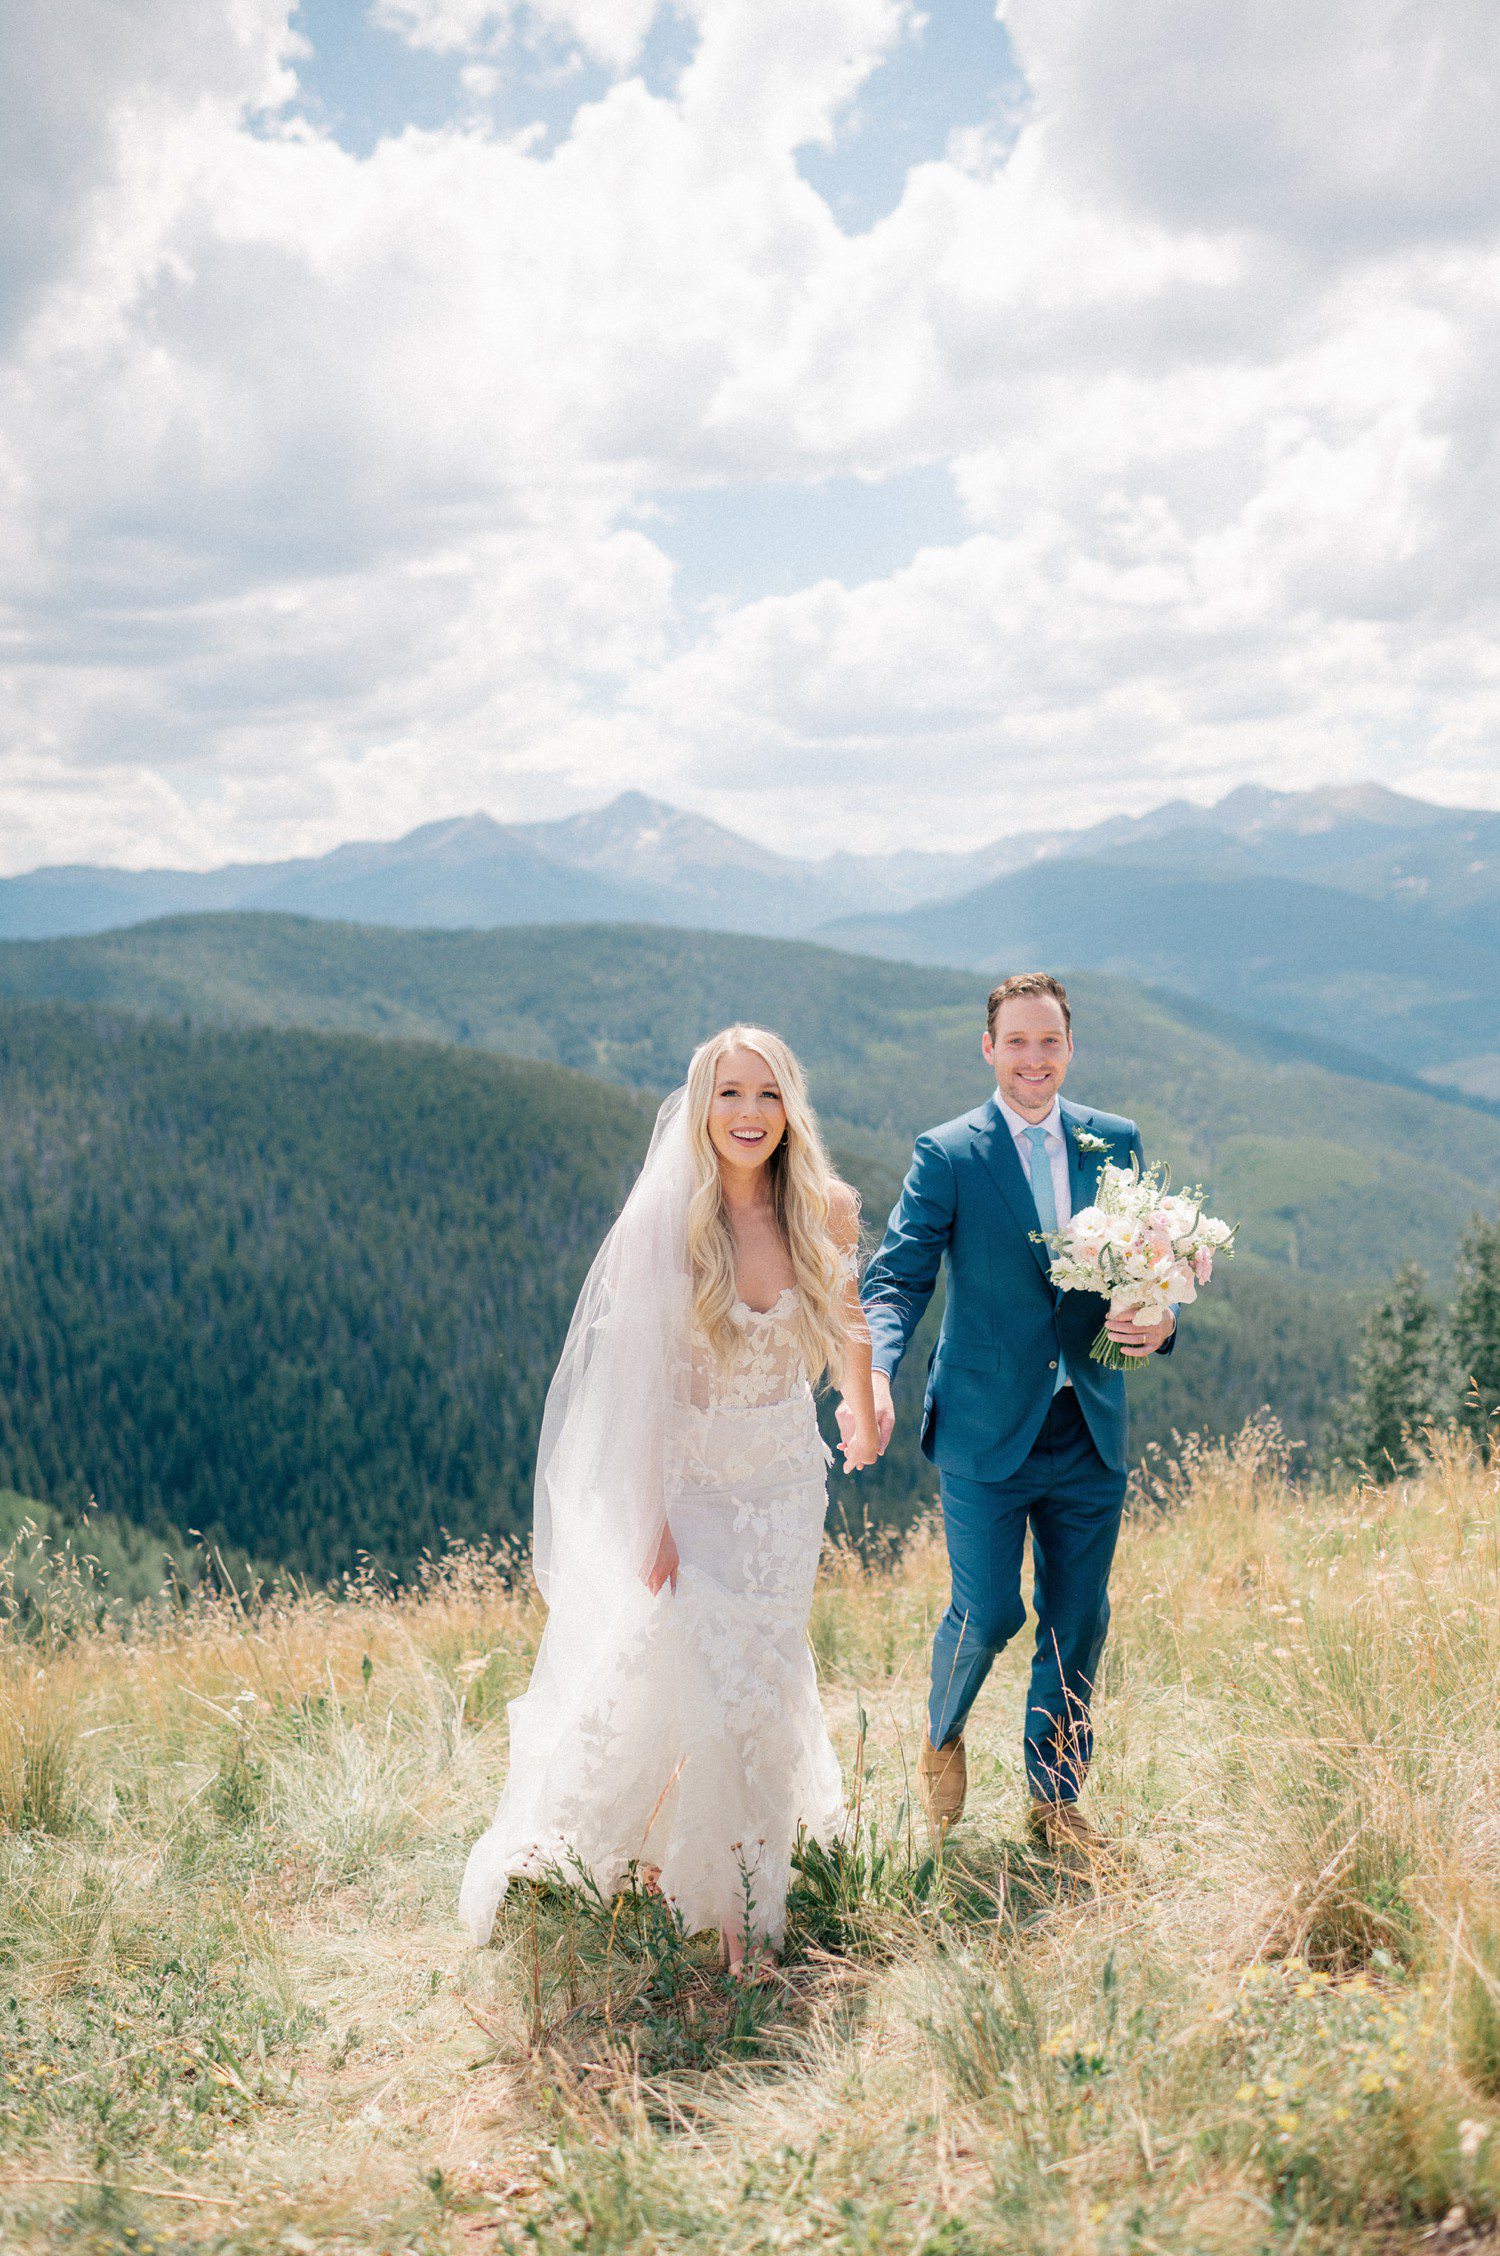 Vail Wedding at The Sebastian Hotel with photos on top of Vail Mountain.